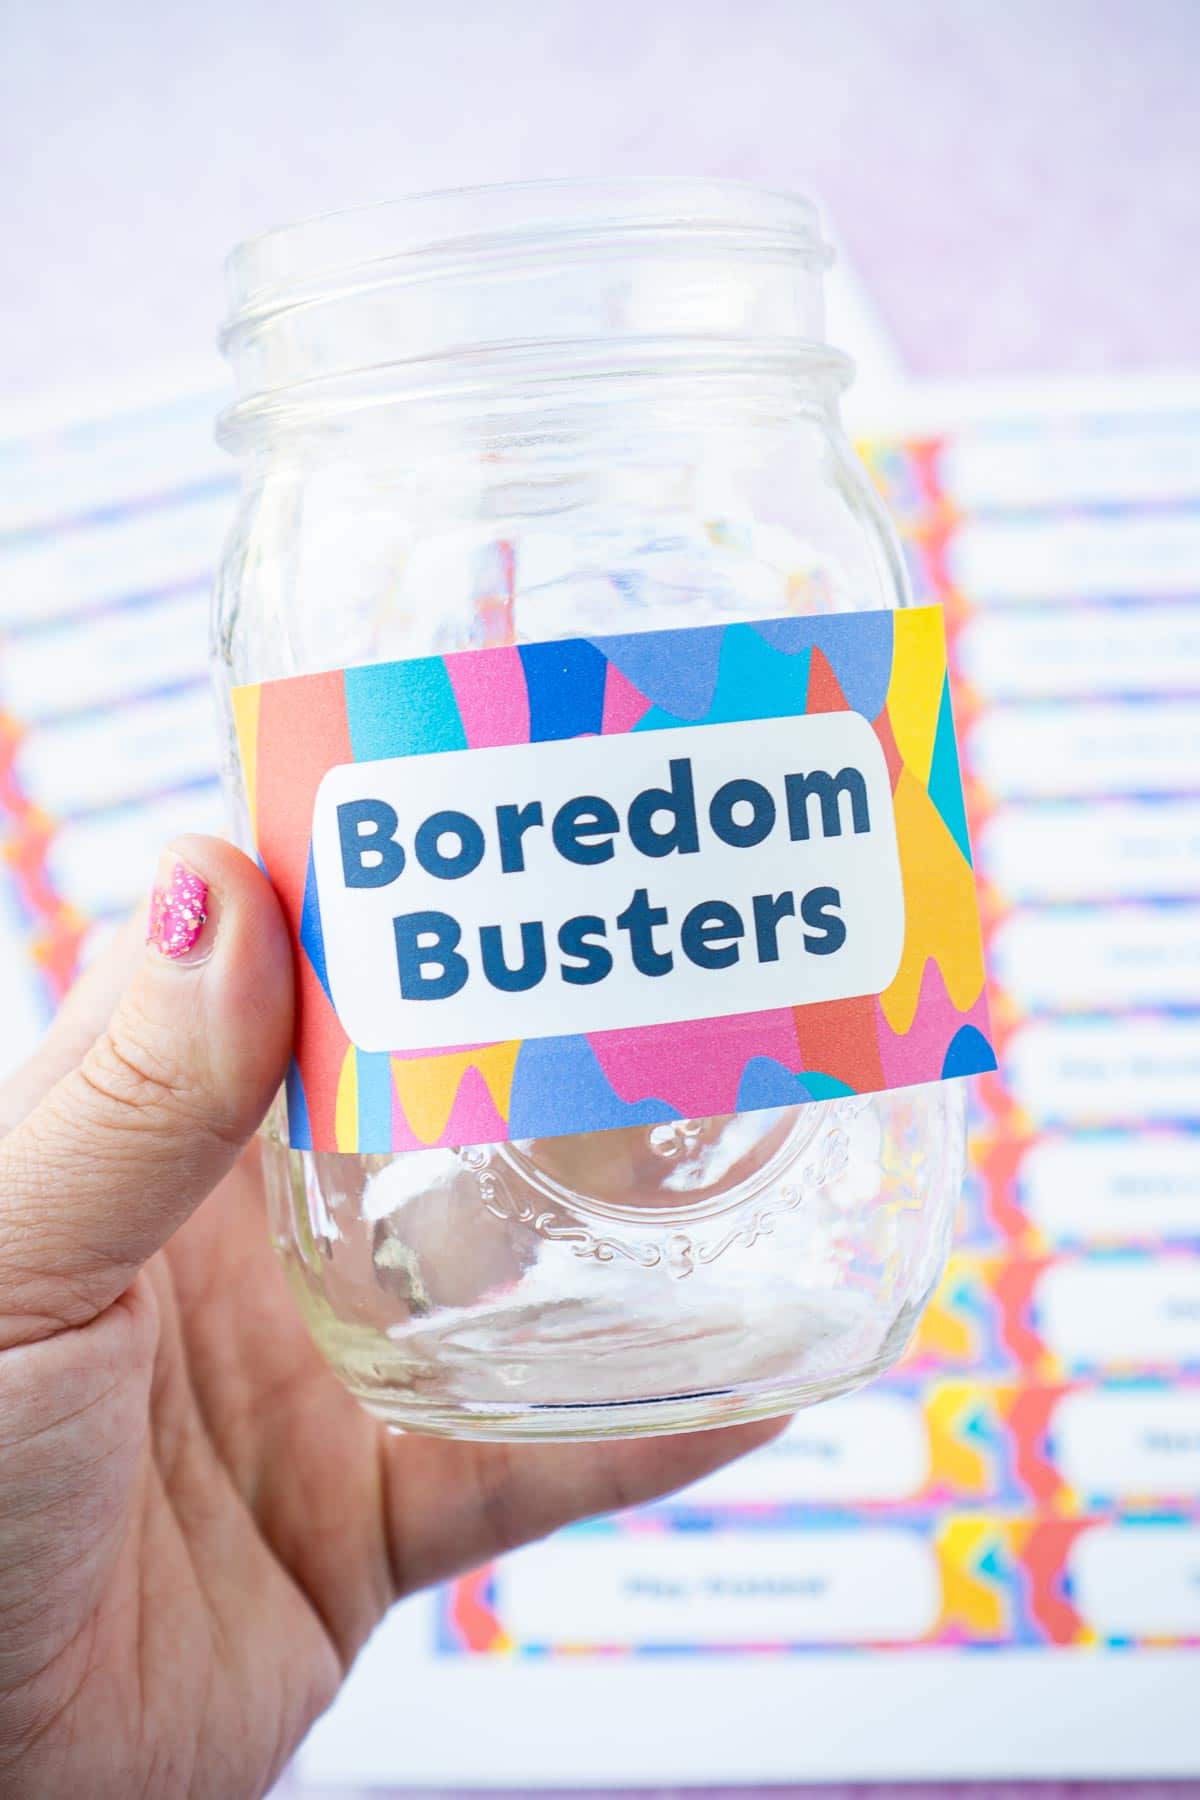 Woman's hand holding a jar with a boredom busters label on the front